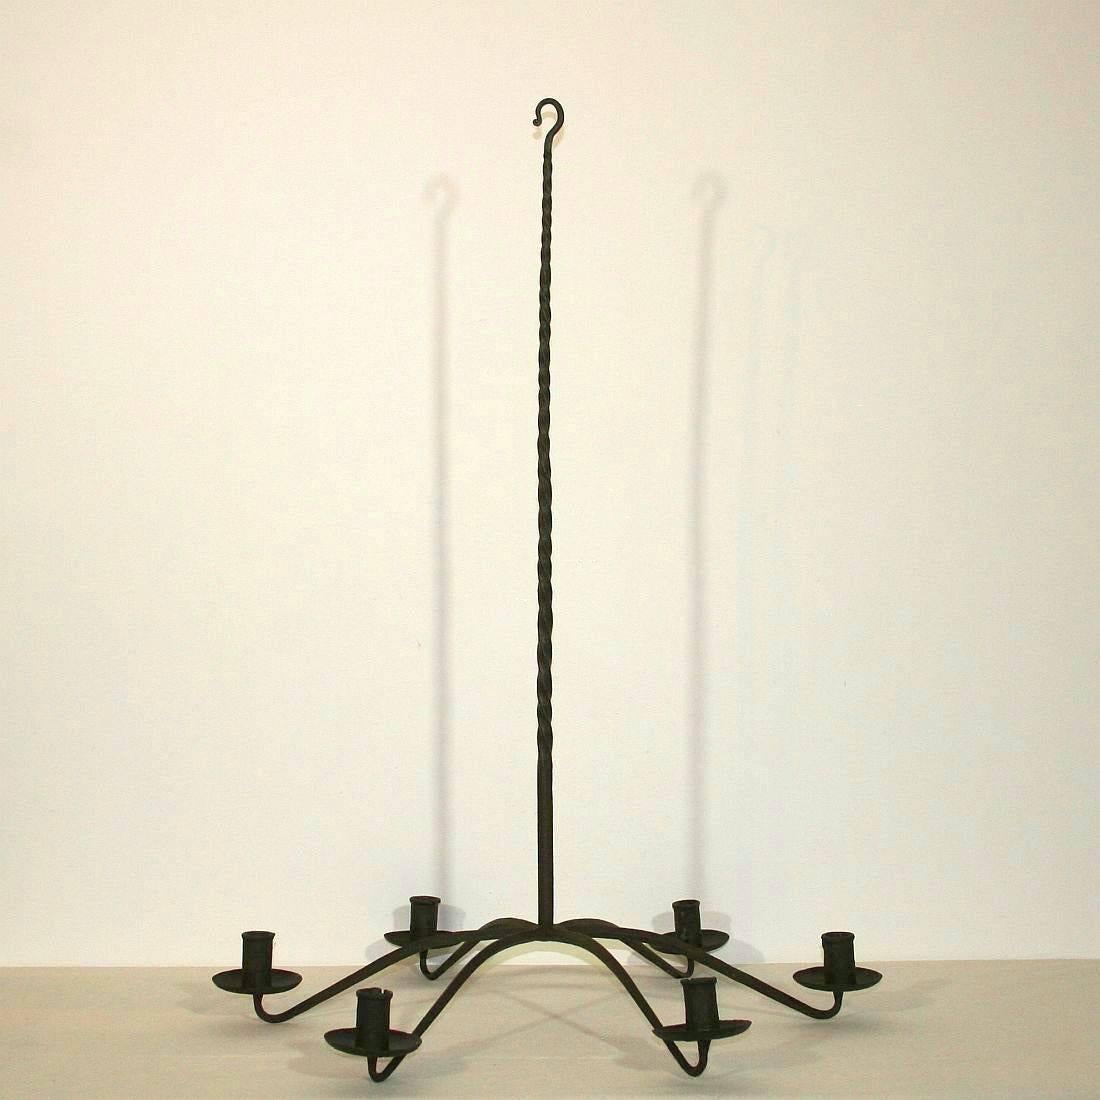 Unique hand-forged iron chandelier
France, circa 1750
Weathered but very good condition.
More pictures available on request.